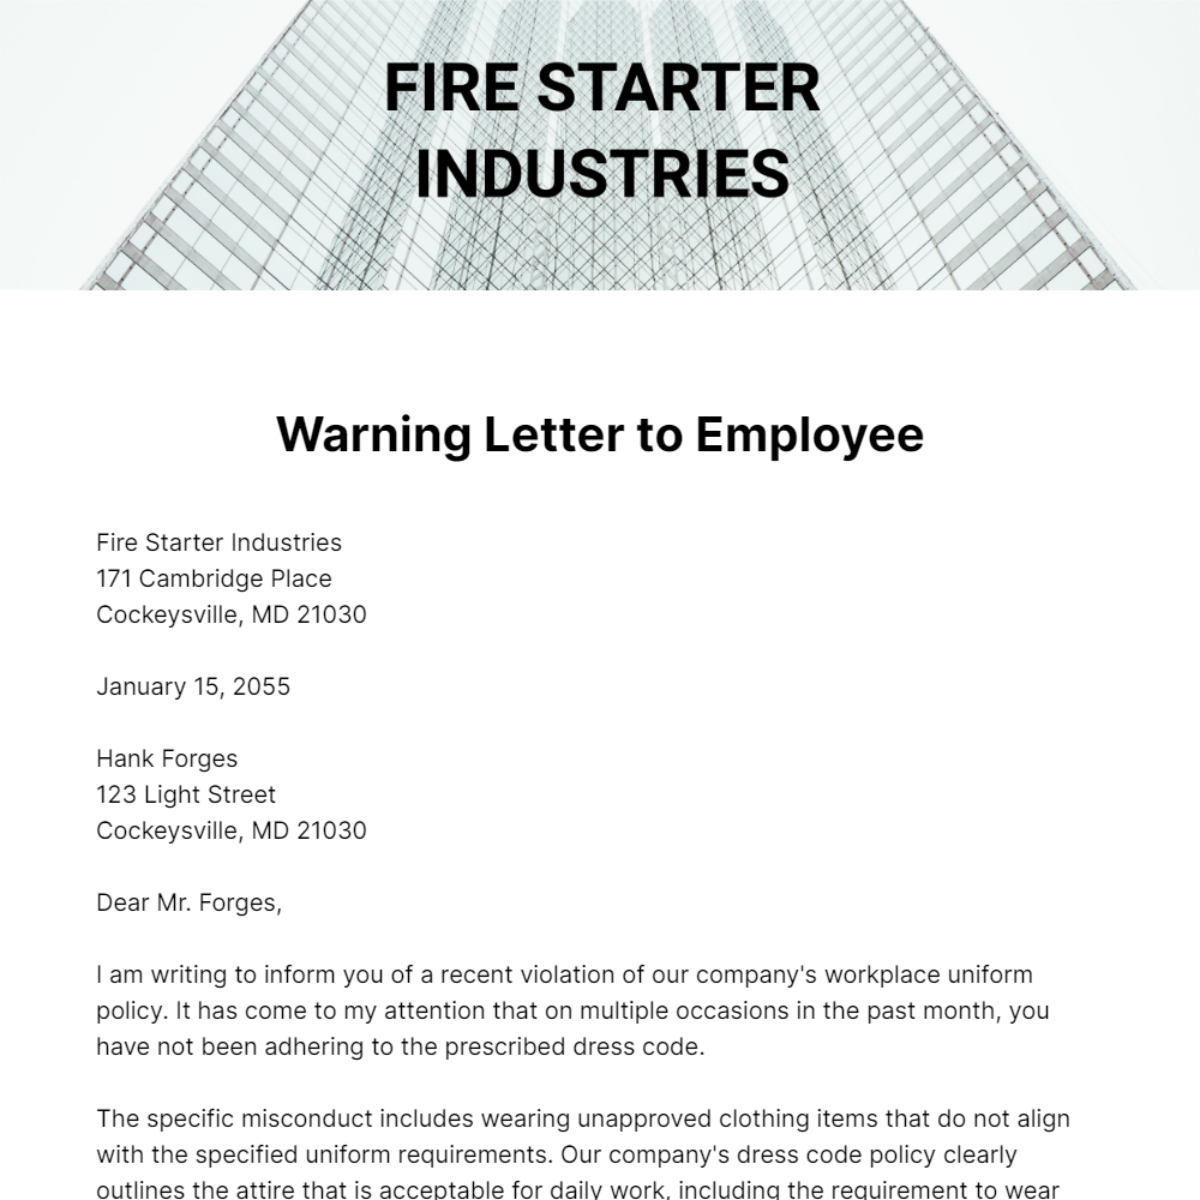 Warning Letter to Employee Template